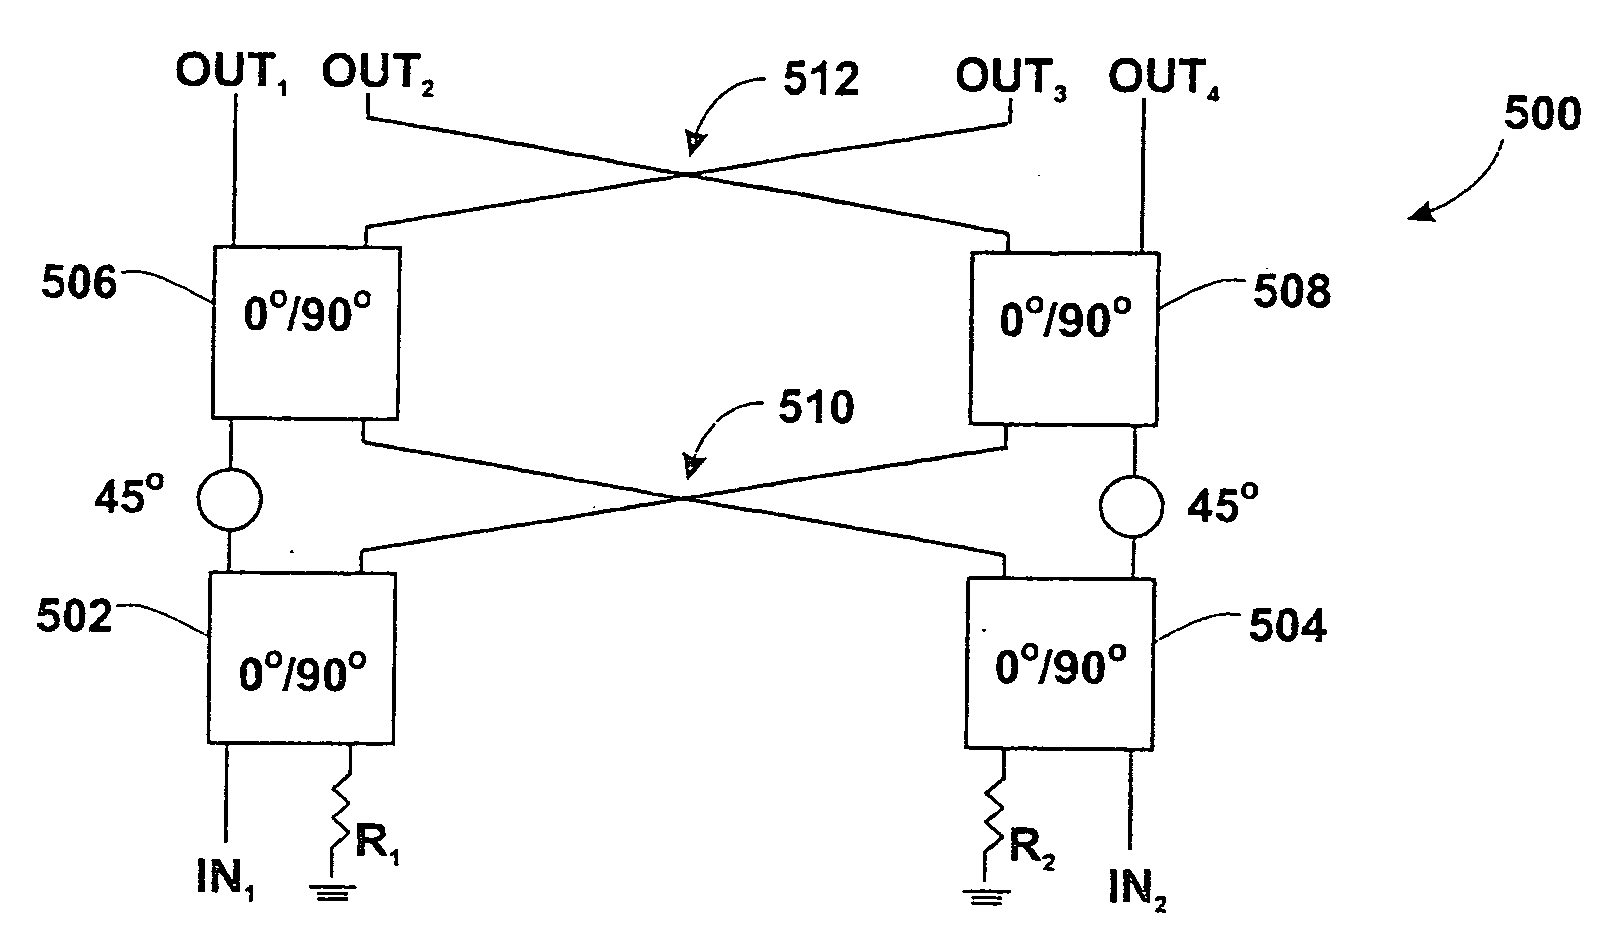 Double-sided, edge-mounted stripline signal processing modules and modular network